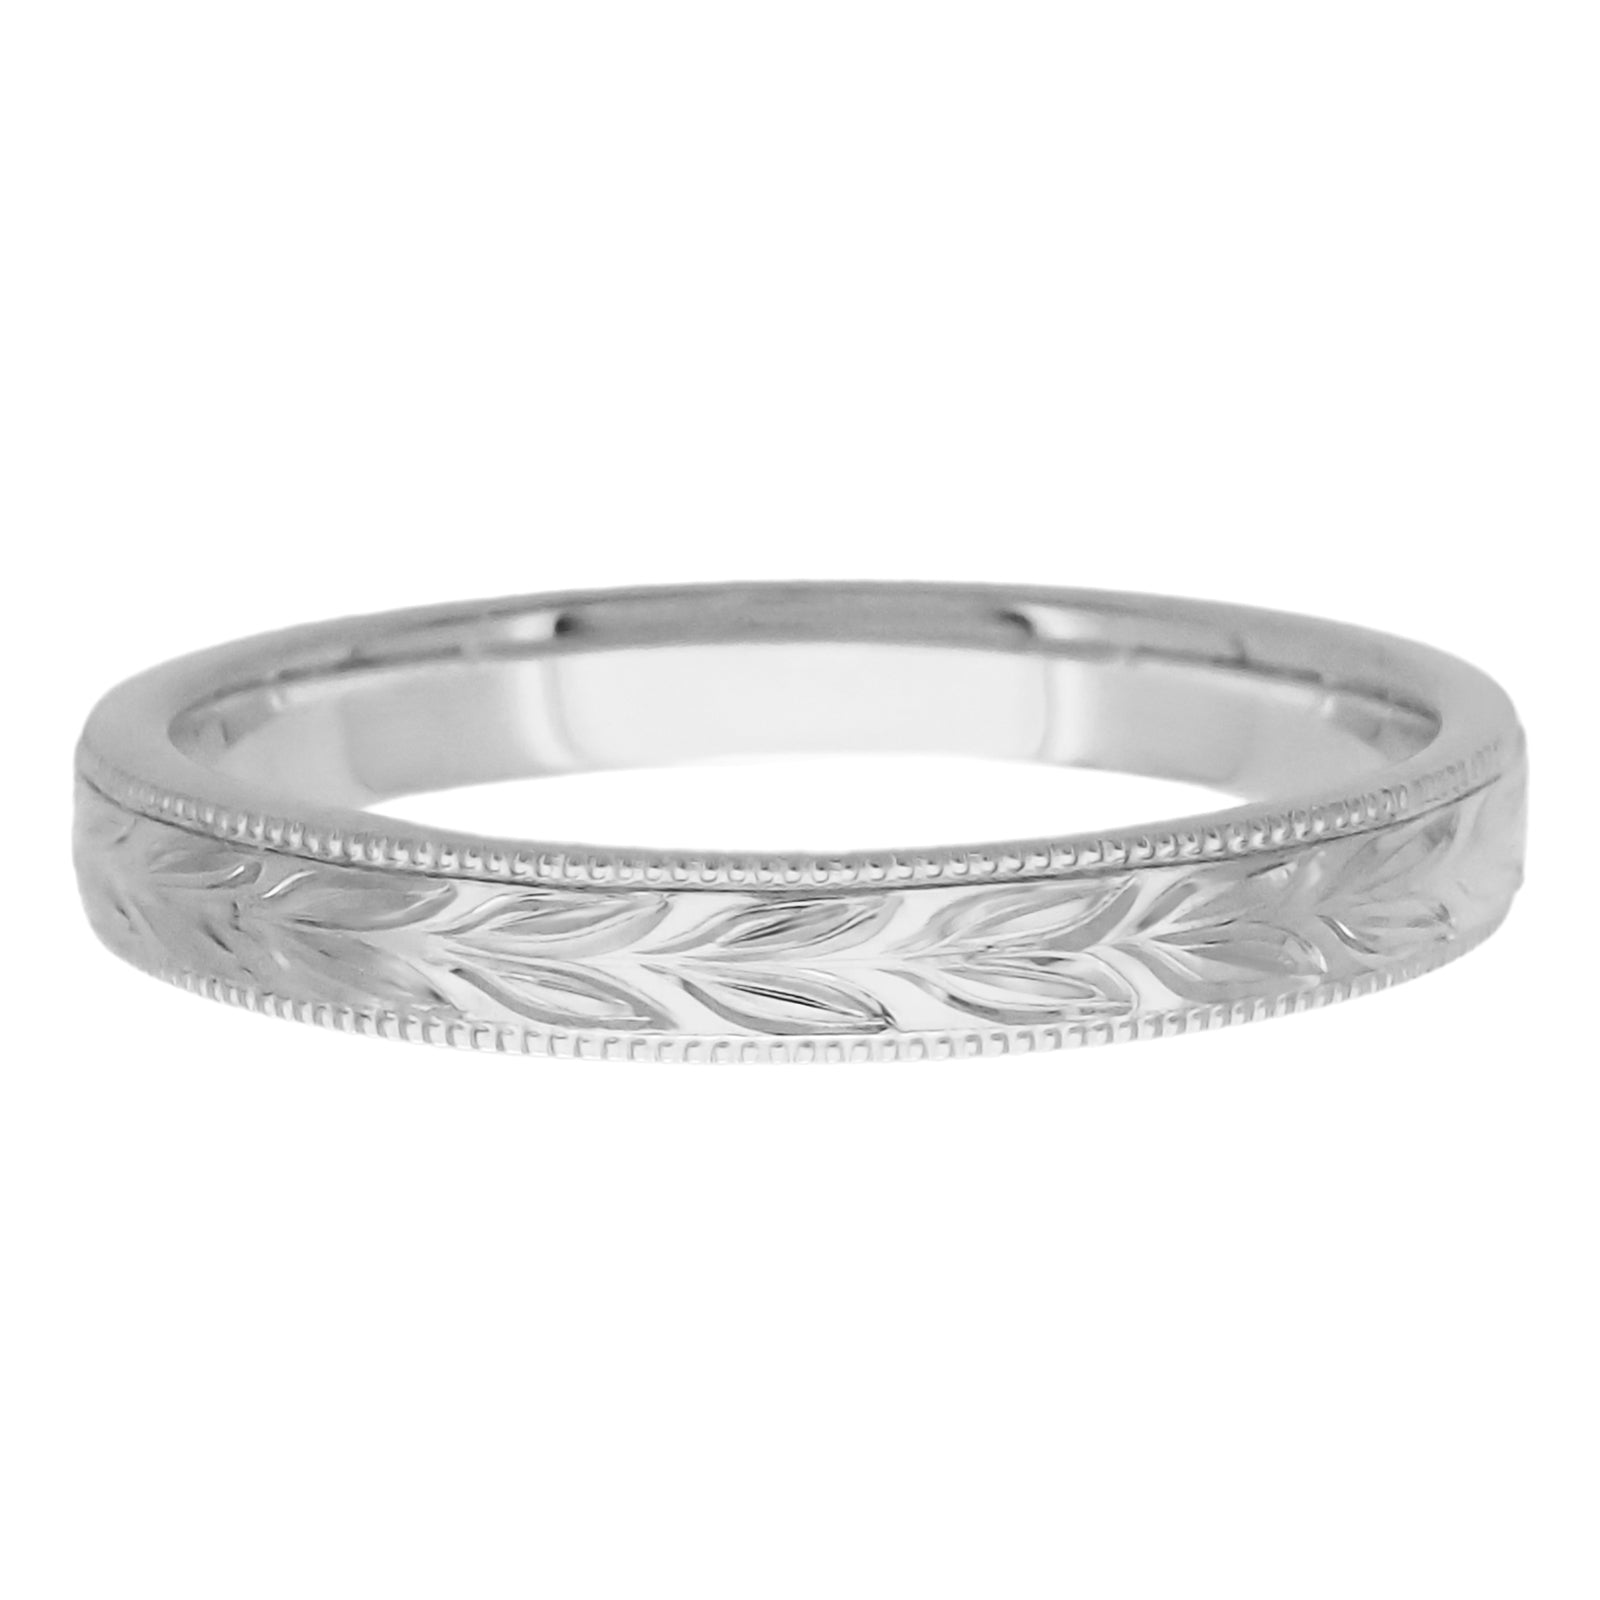 Art Deco Hand Carved Hawaiian Maile Leaves Wedding Band in White Gold - 14K or 18K - Item: R719 - Image: 3